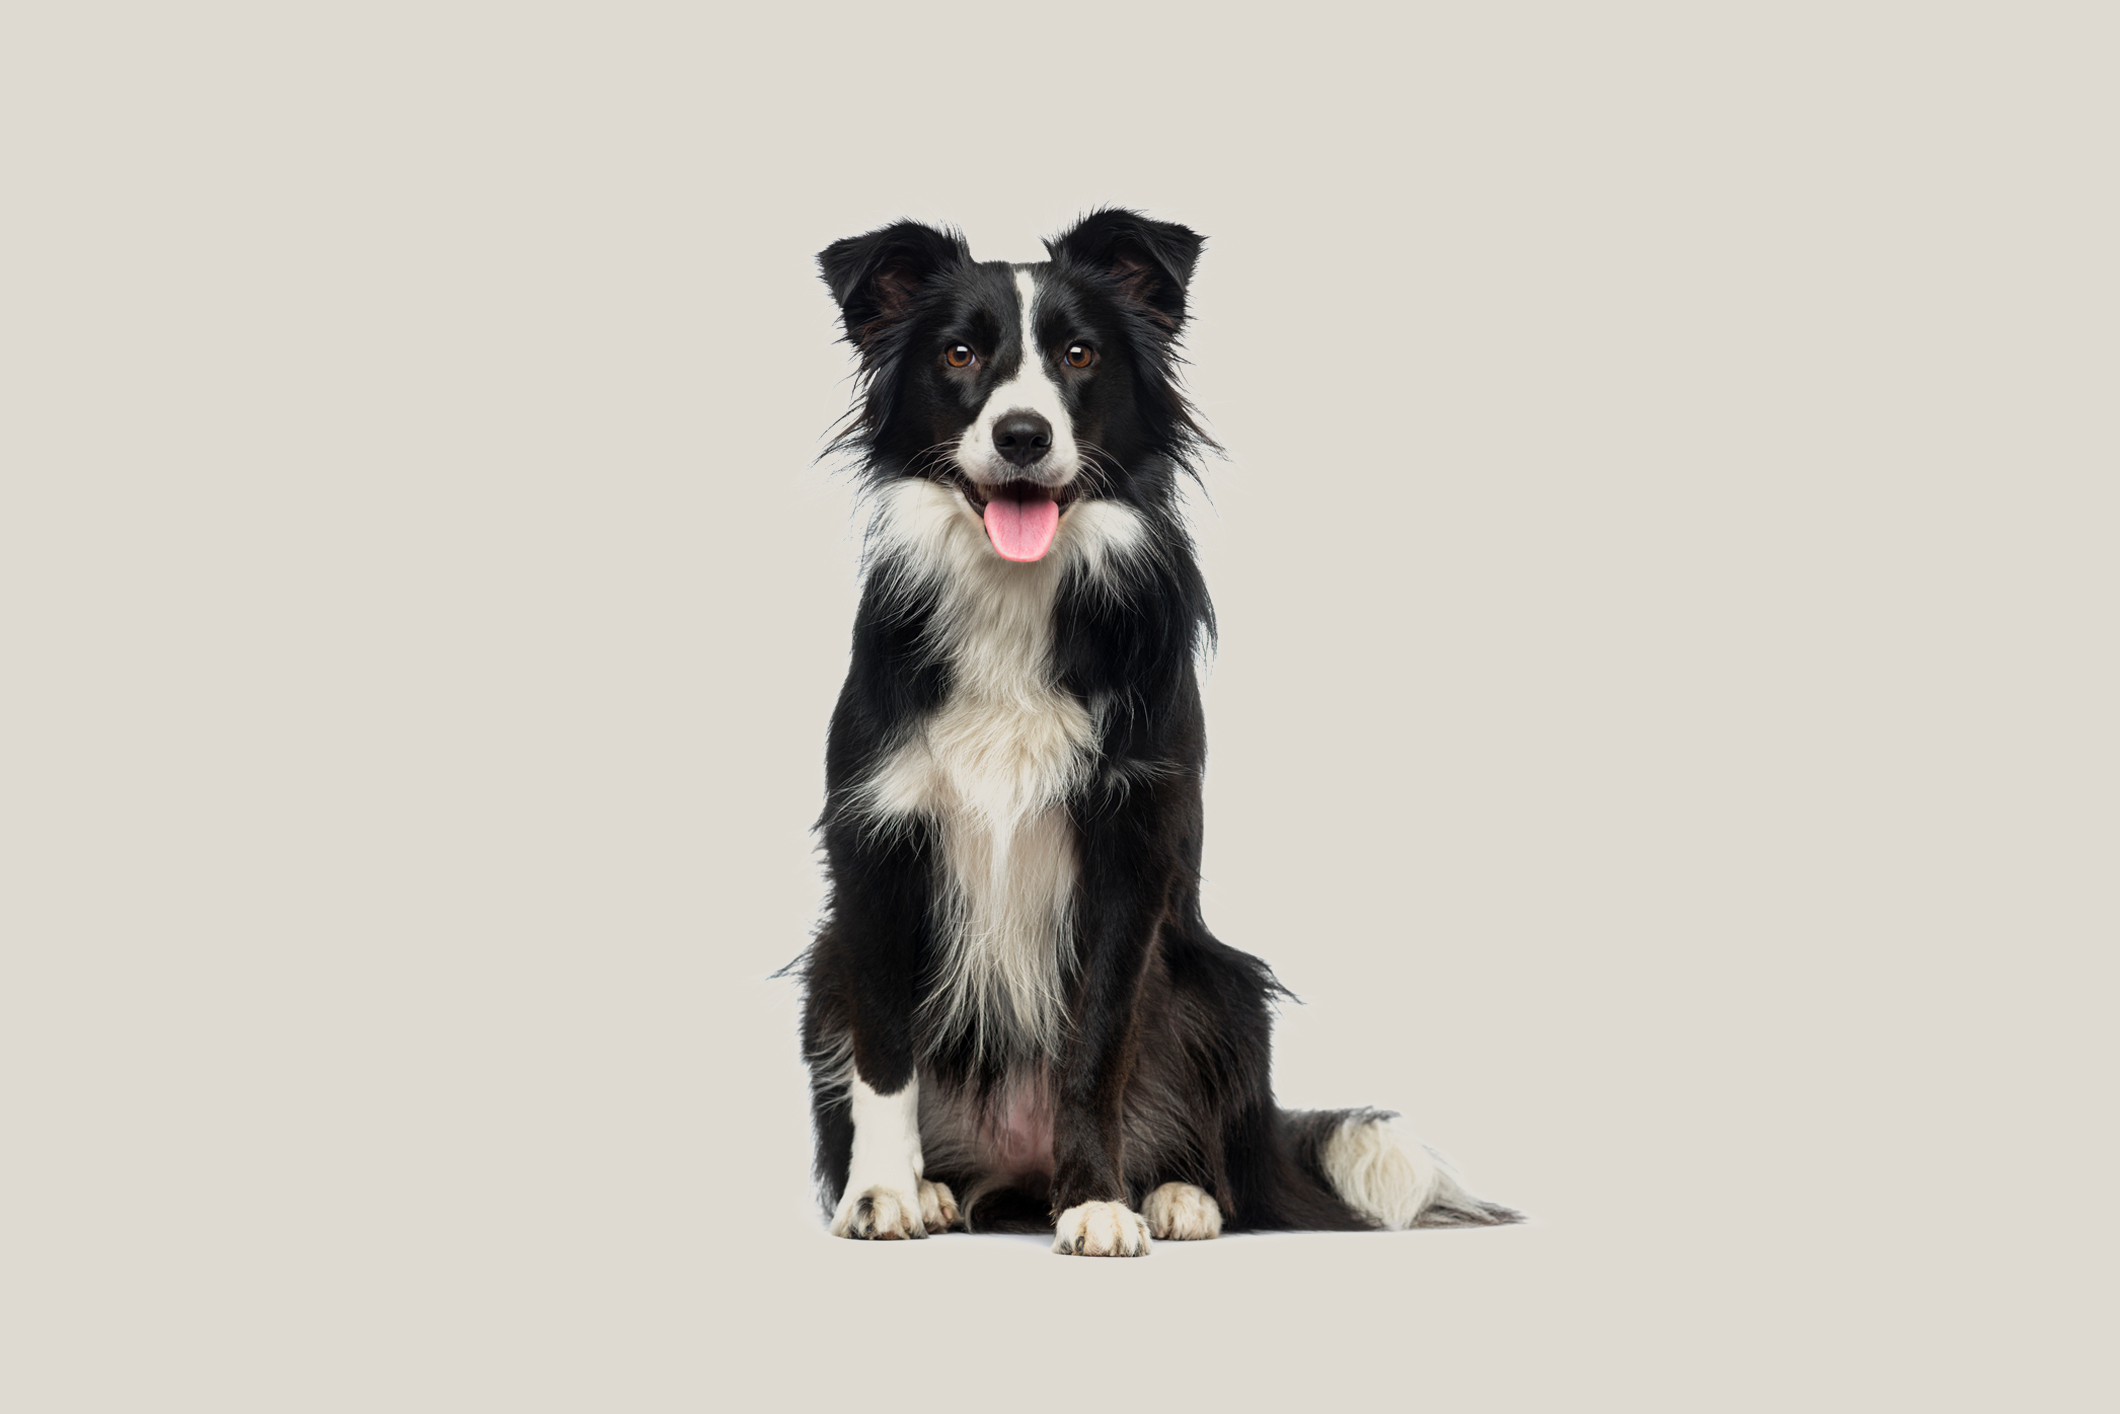 Tips for Managing Your Border Collies Weight